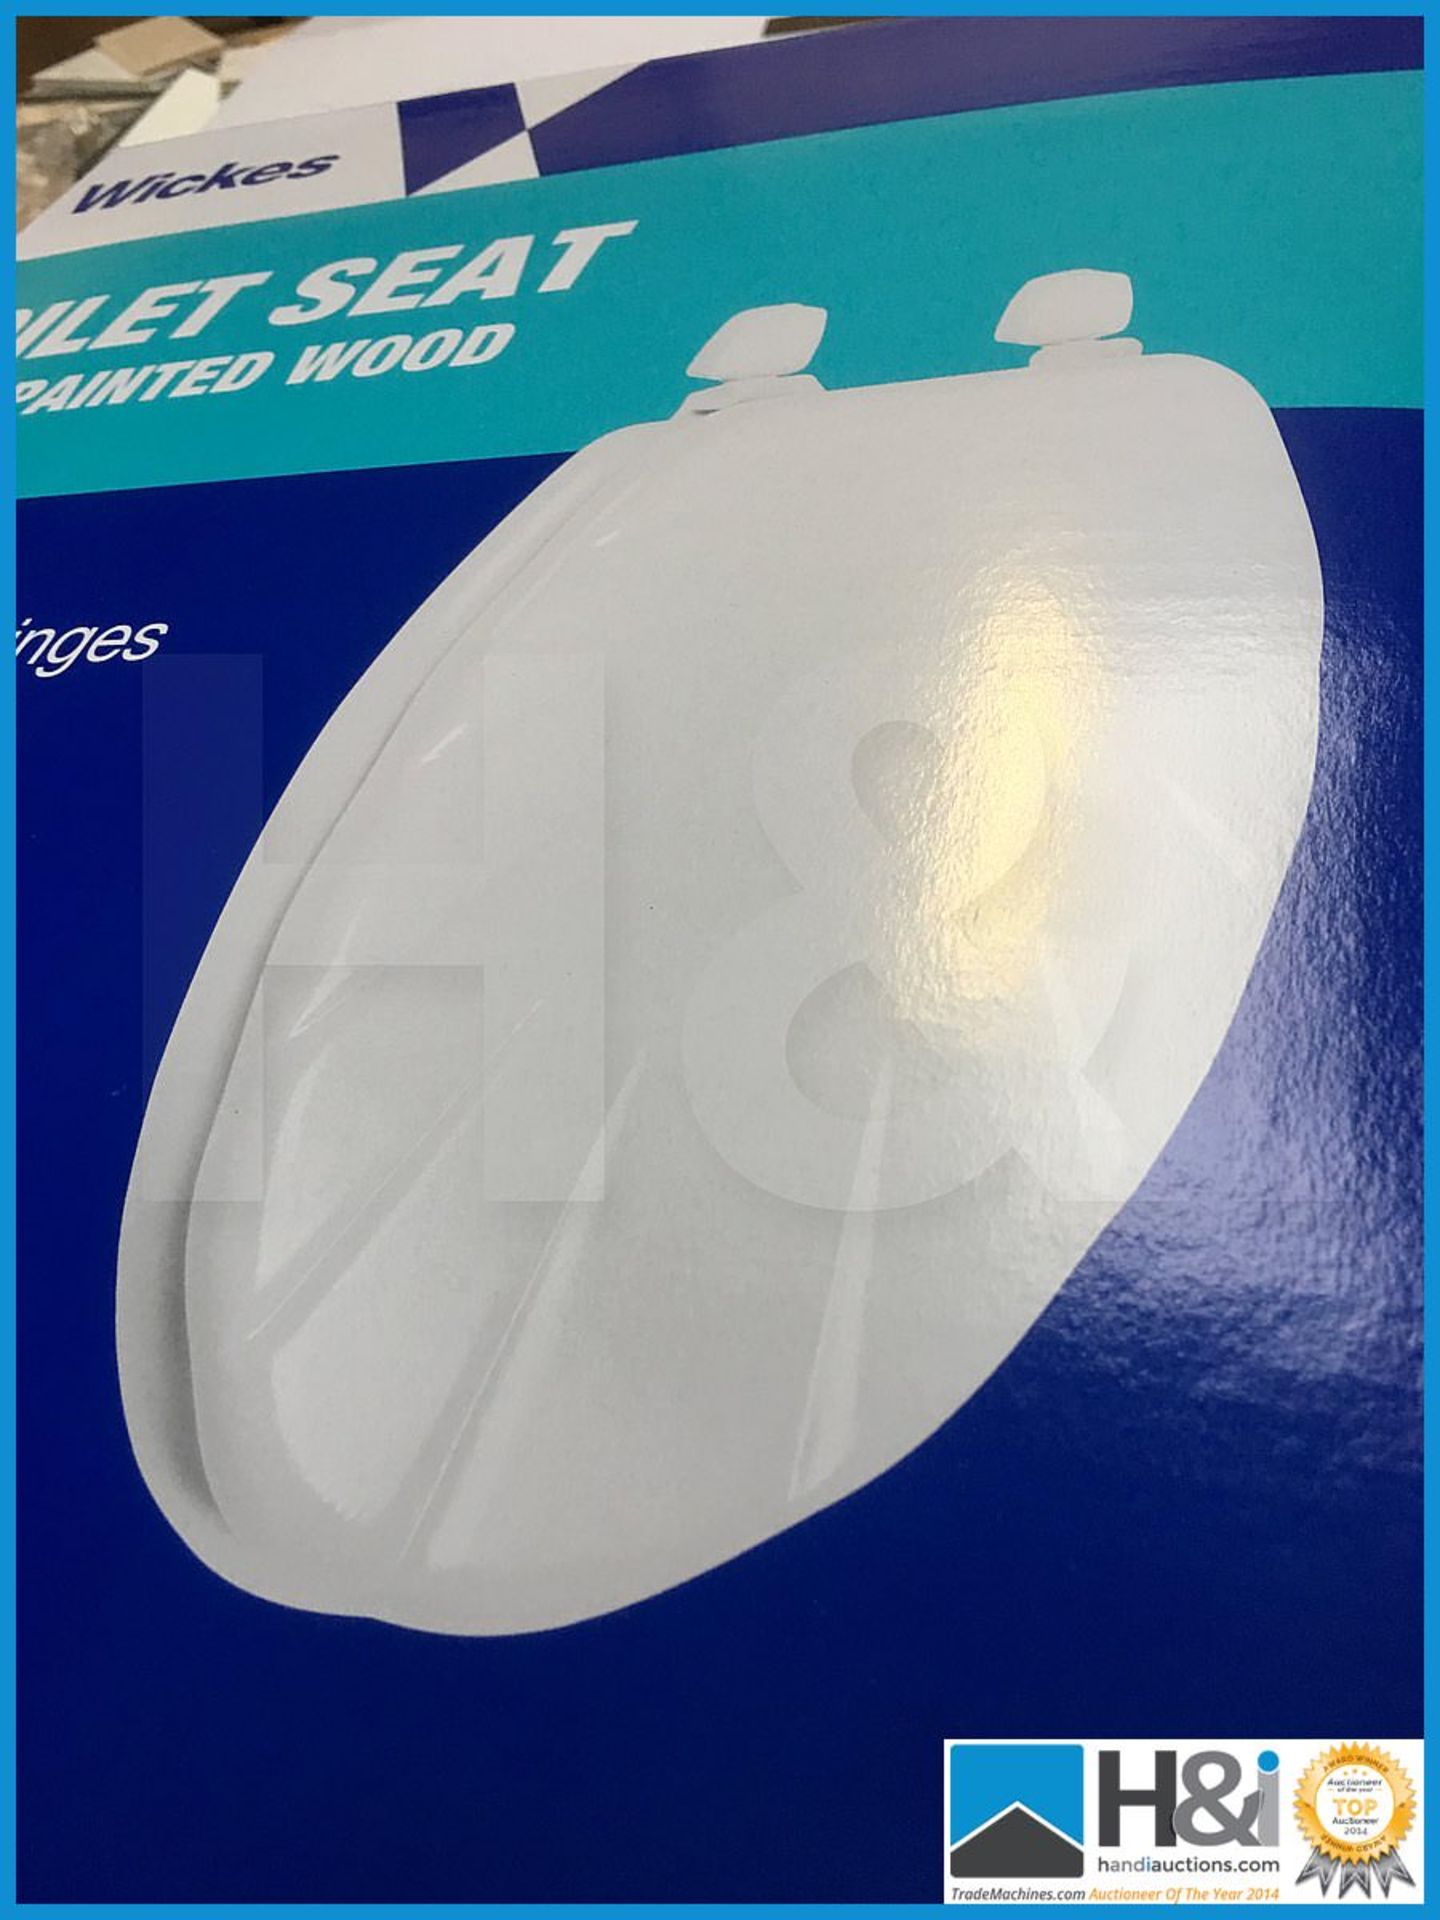 Designer Wickes white painted wood shell design toilet seat. New and Boxed. Suggested - Image 2 of 4